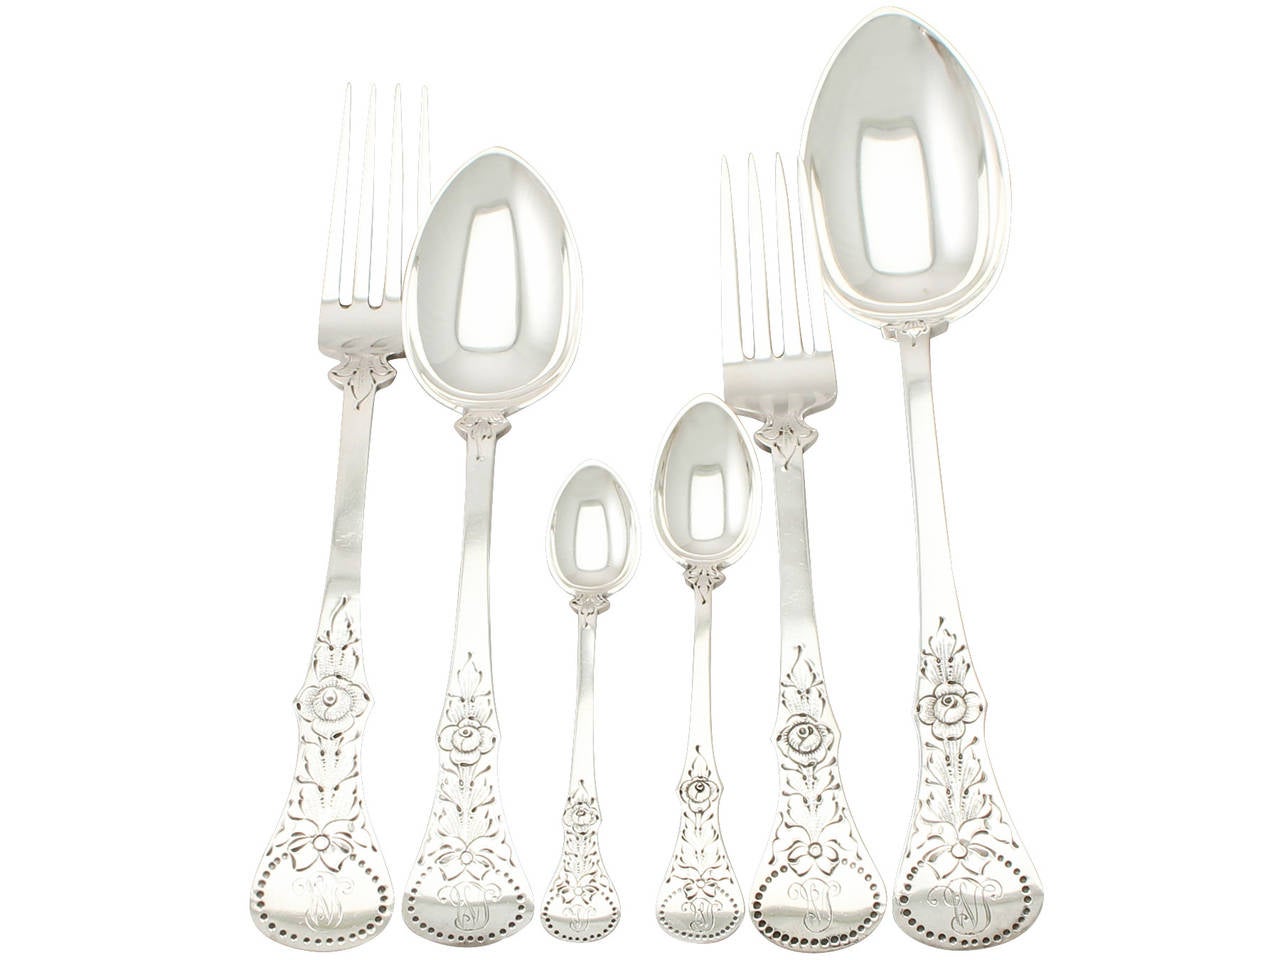 An exceptional, fine and impressive antique Norwegian 830 standard silver straight flatware service for six persons; an addition to our canteen of cutlery collection.

The pieces of this exceptional antique Norwegian silver straight flatware set /